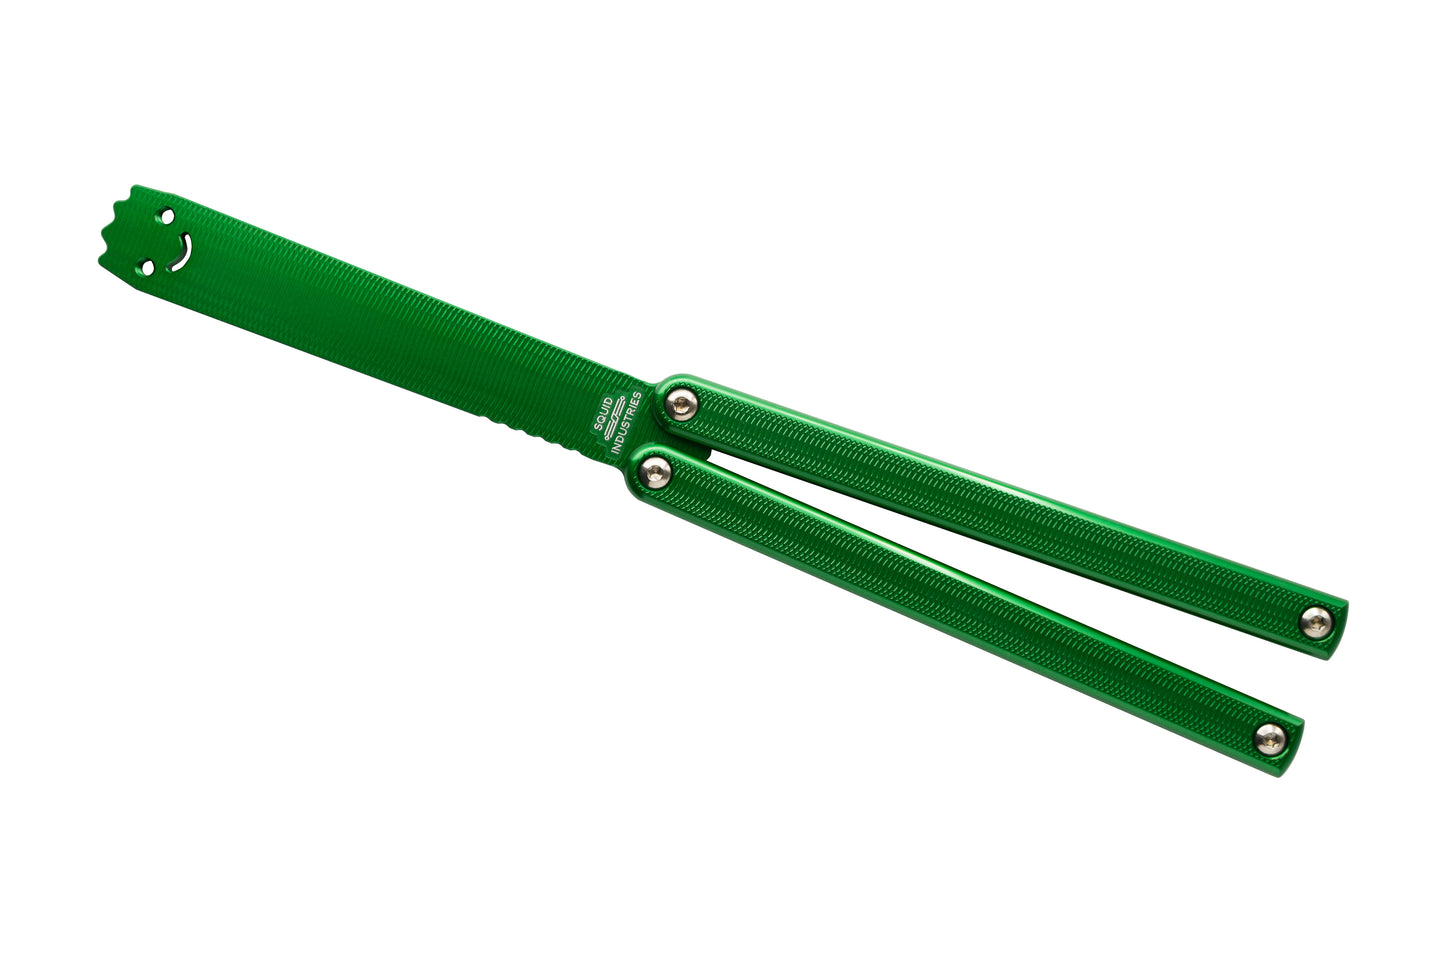 green squiddy-al balisong butterfly knife trainer